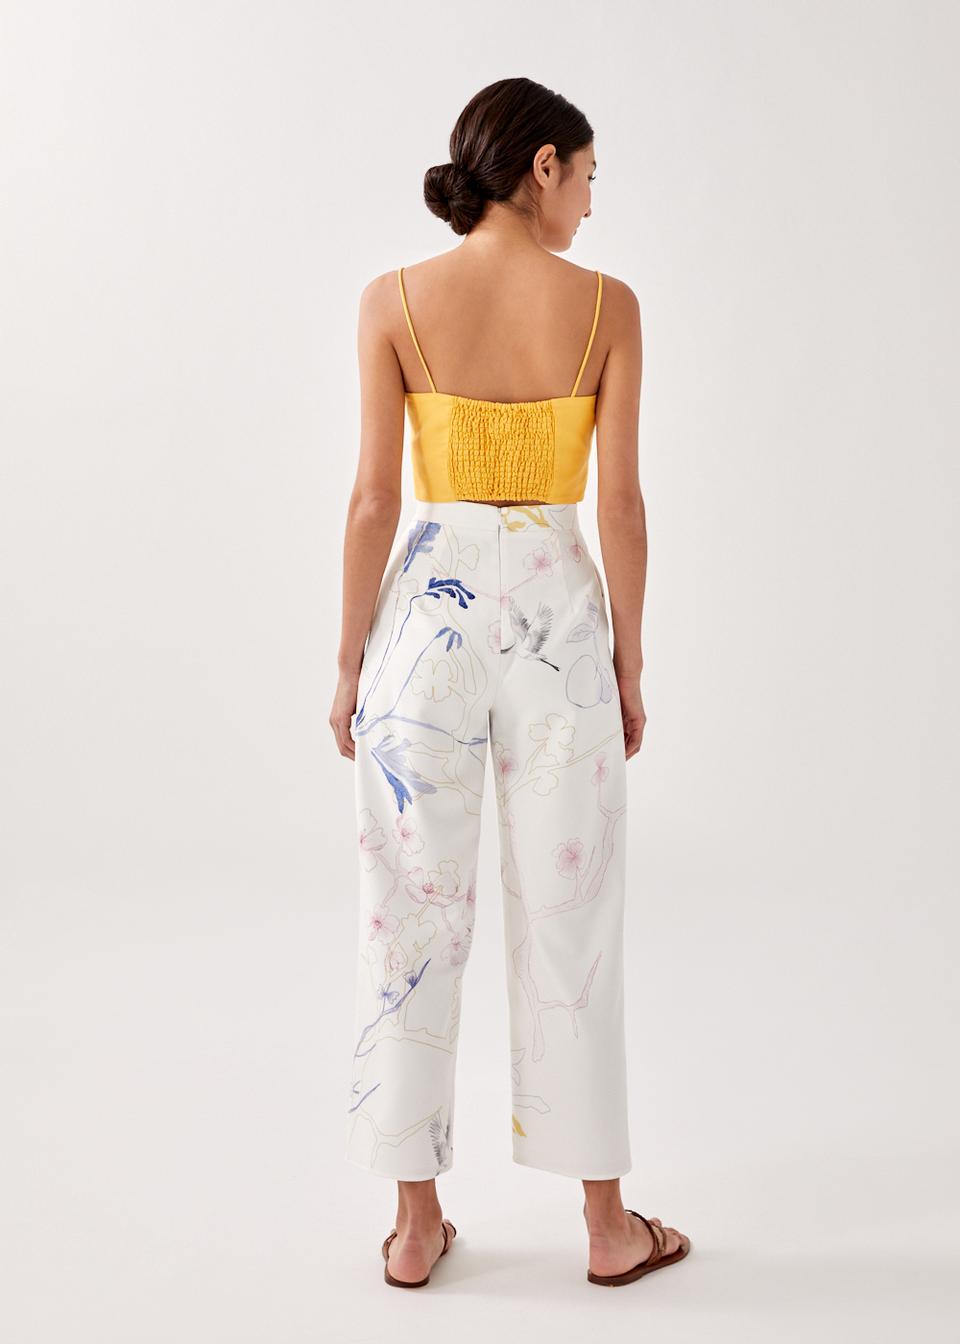 Kimisha Tailored Pants in Eastern Tapestry